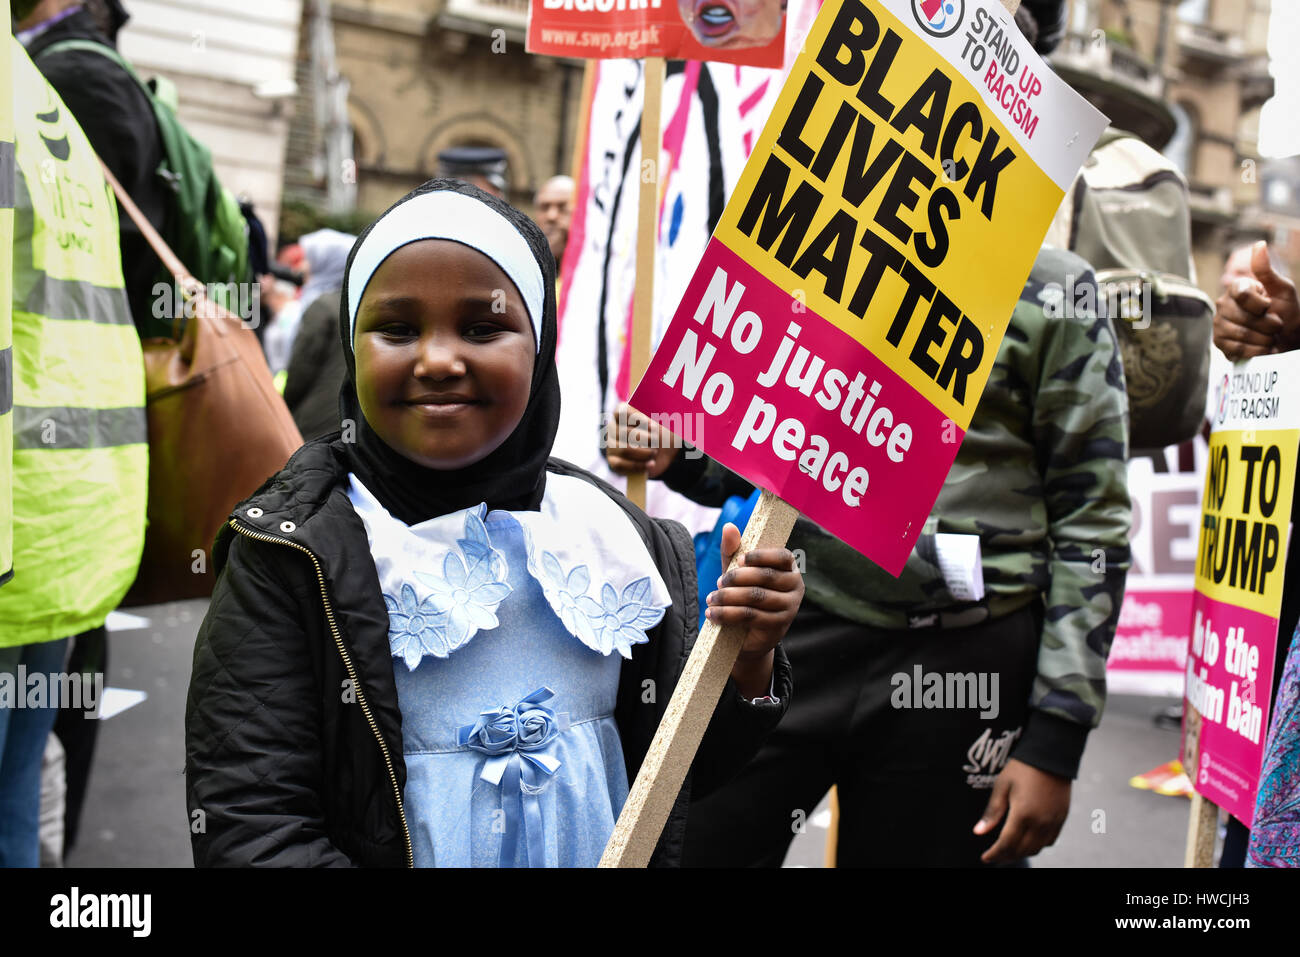 London, UK. 18th Mar, 2017. A young protester at an anti-racism demonstration in Portland Place on United Nations Anti-Racism Day, holding a sign that reads 'Black lives matter'. Hundreds of protesters marched from Portland Place to Parliament Square to oppose racism, islamophobia and anti-semitism. Credit: Jacob Sacks-Jones/Alamy Live News. Stock Photo